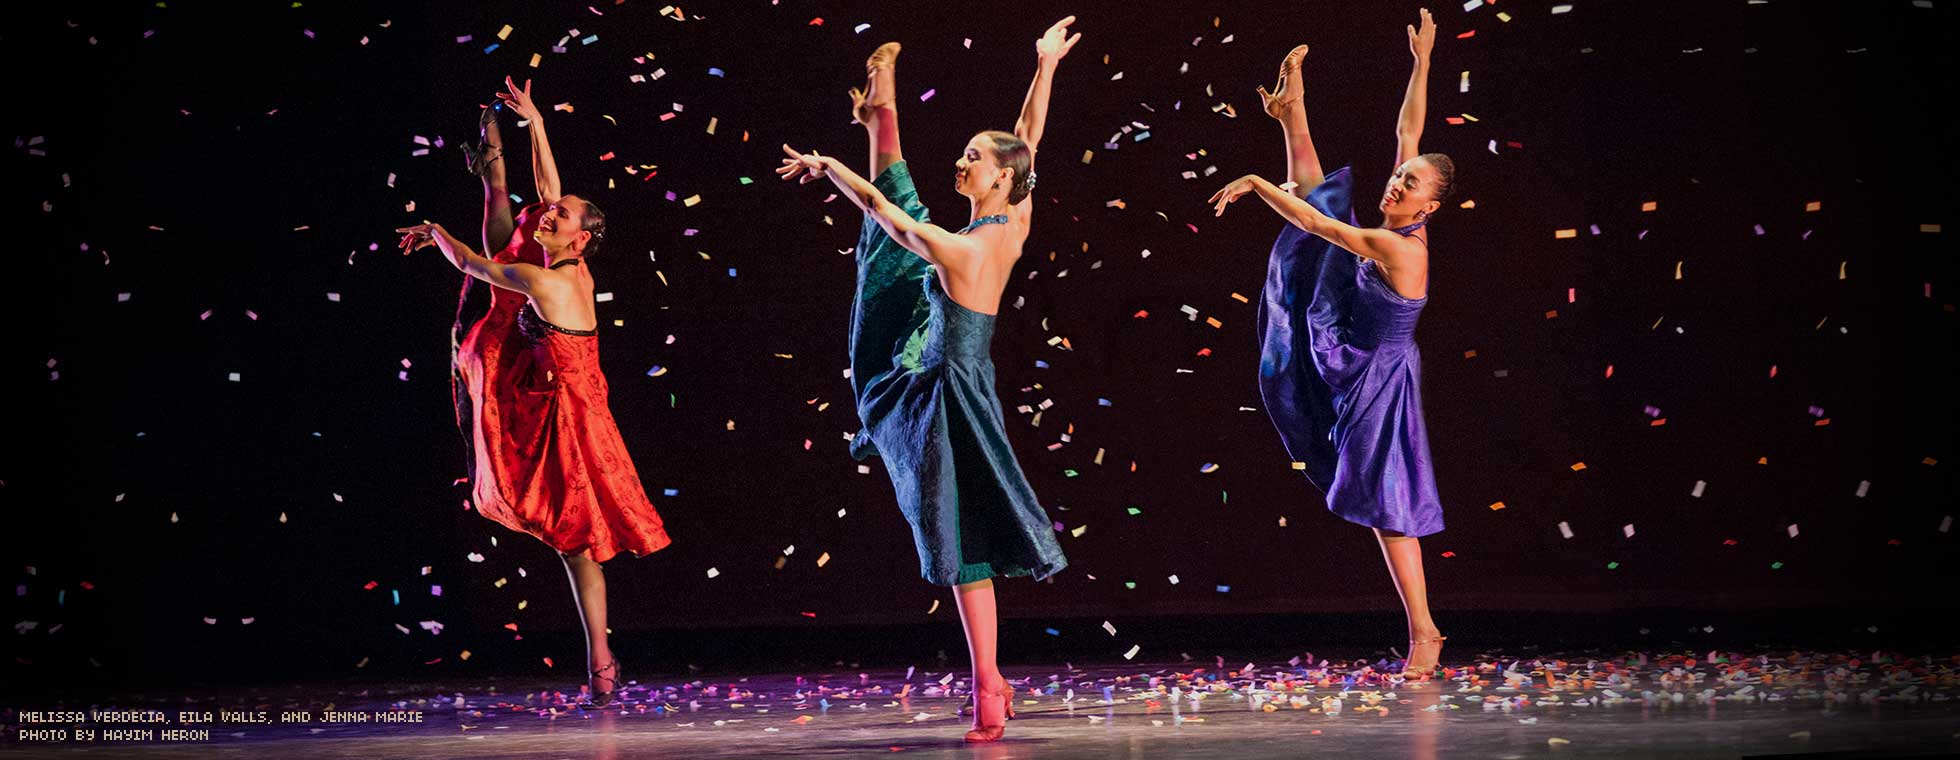 3 female dancers in traditional dresses each stretch with one leg in the air while standing on one foot. Confetti falls around them.